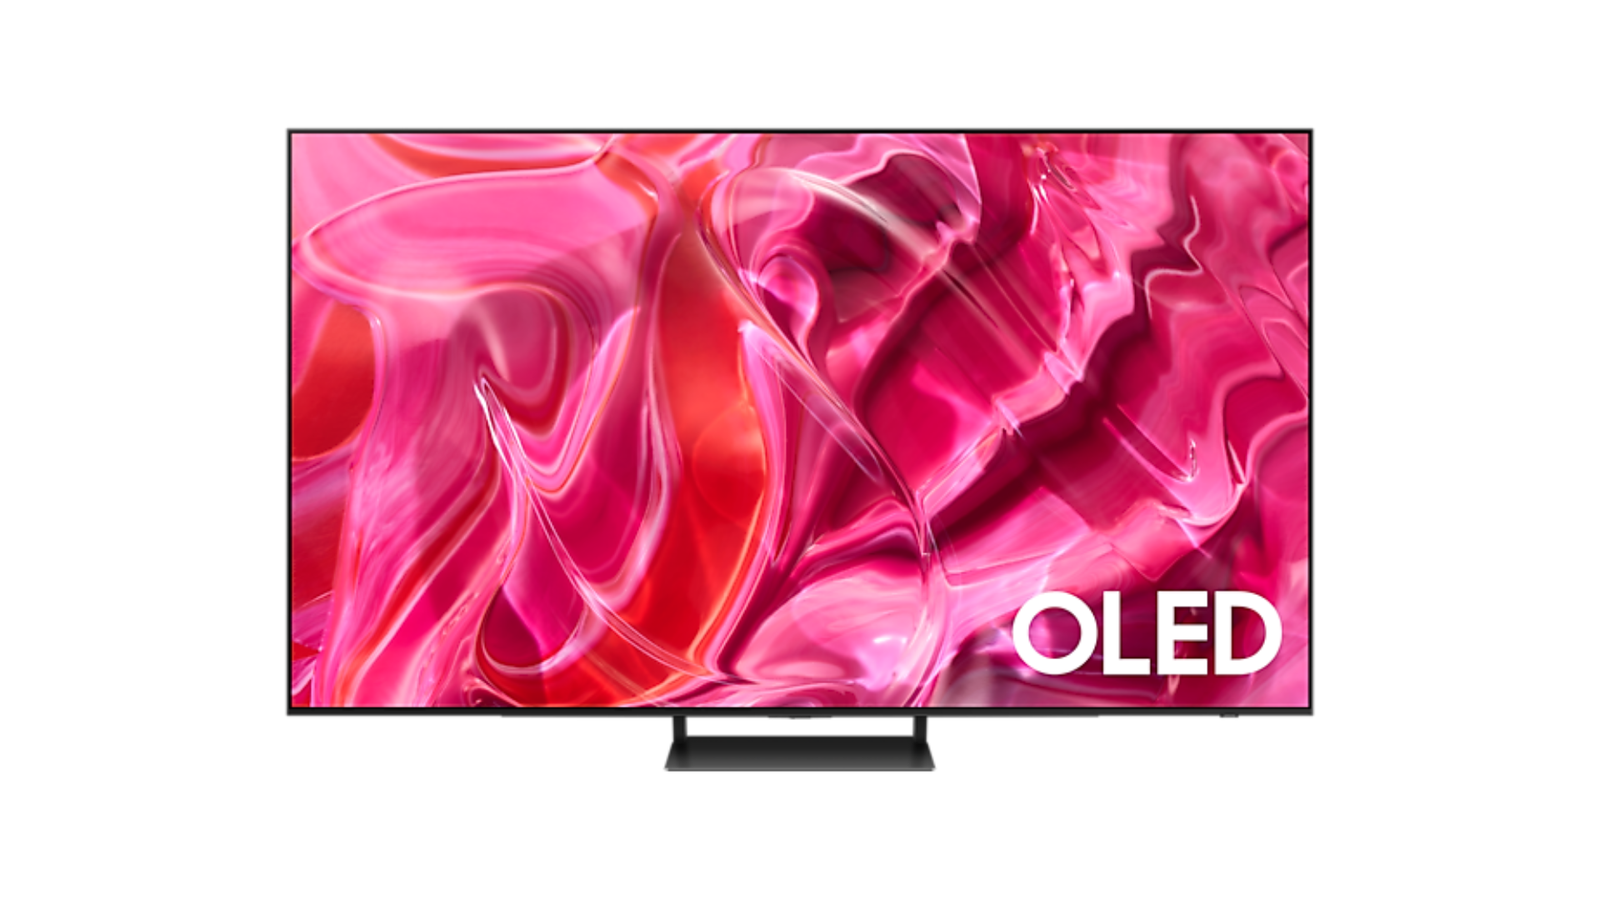 An image of the Samsung S90C OLED TV